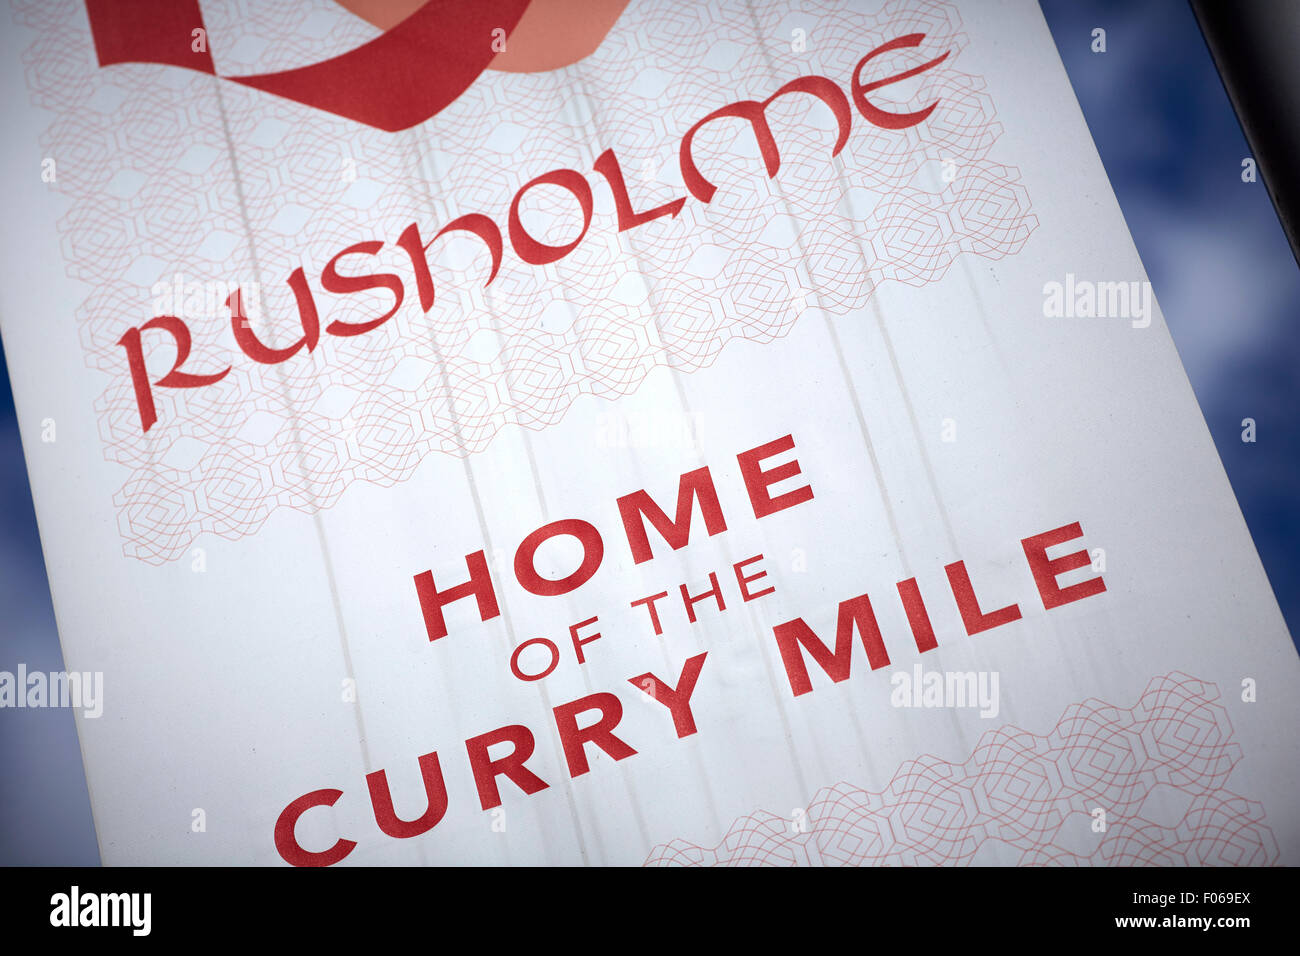 Rusholme A34 curry mile in Manchester Uk   First bus 42 route  cycling on road bike cyclist Shop shopping shopper store retail s Stock Photo